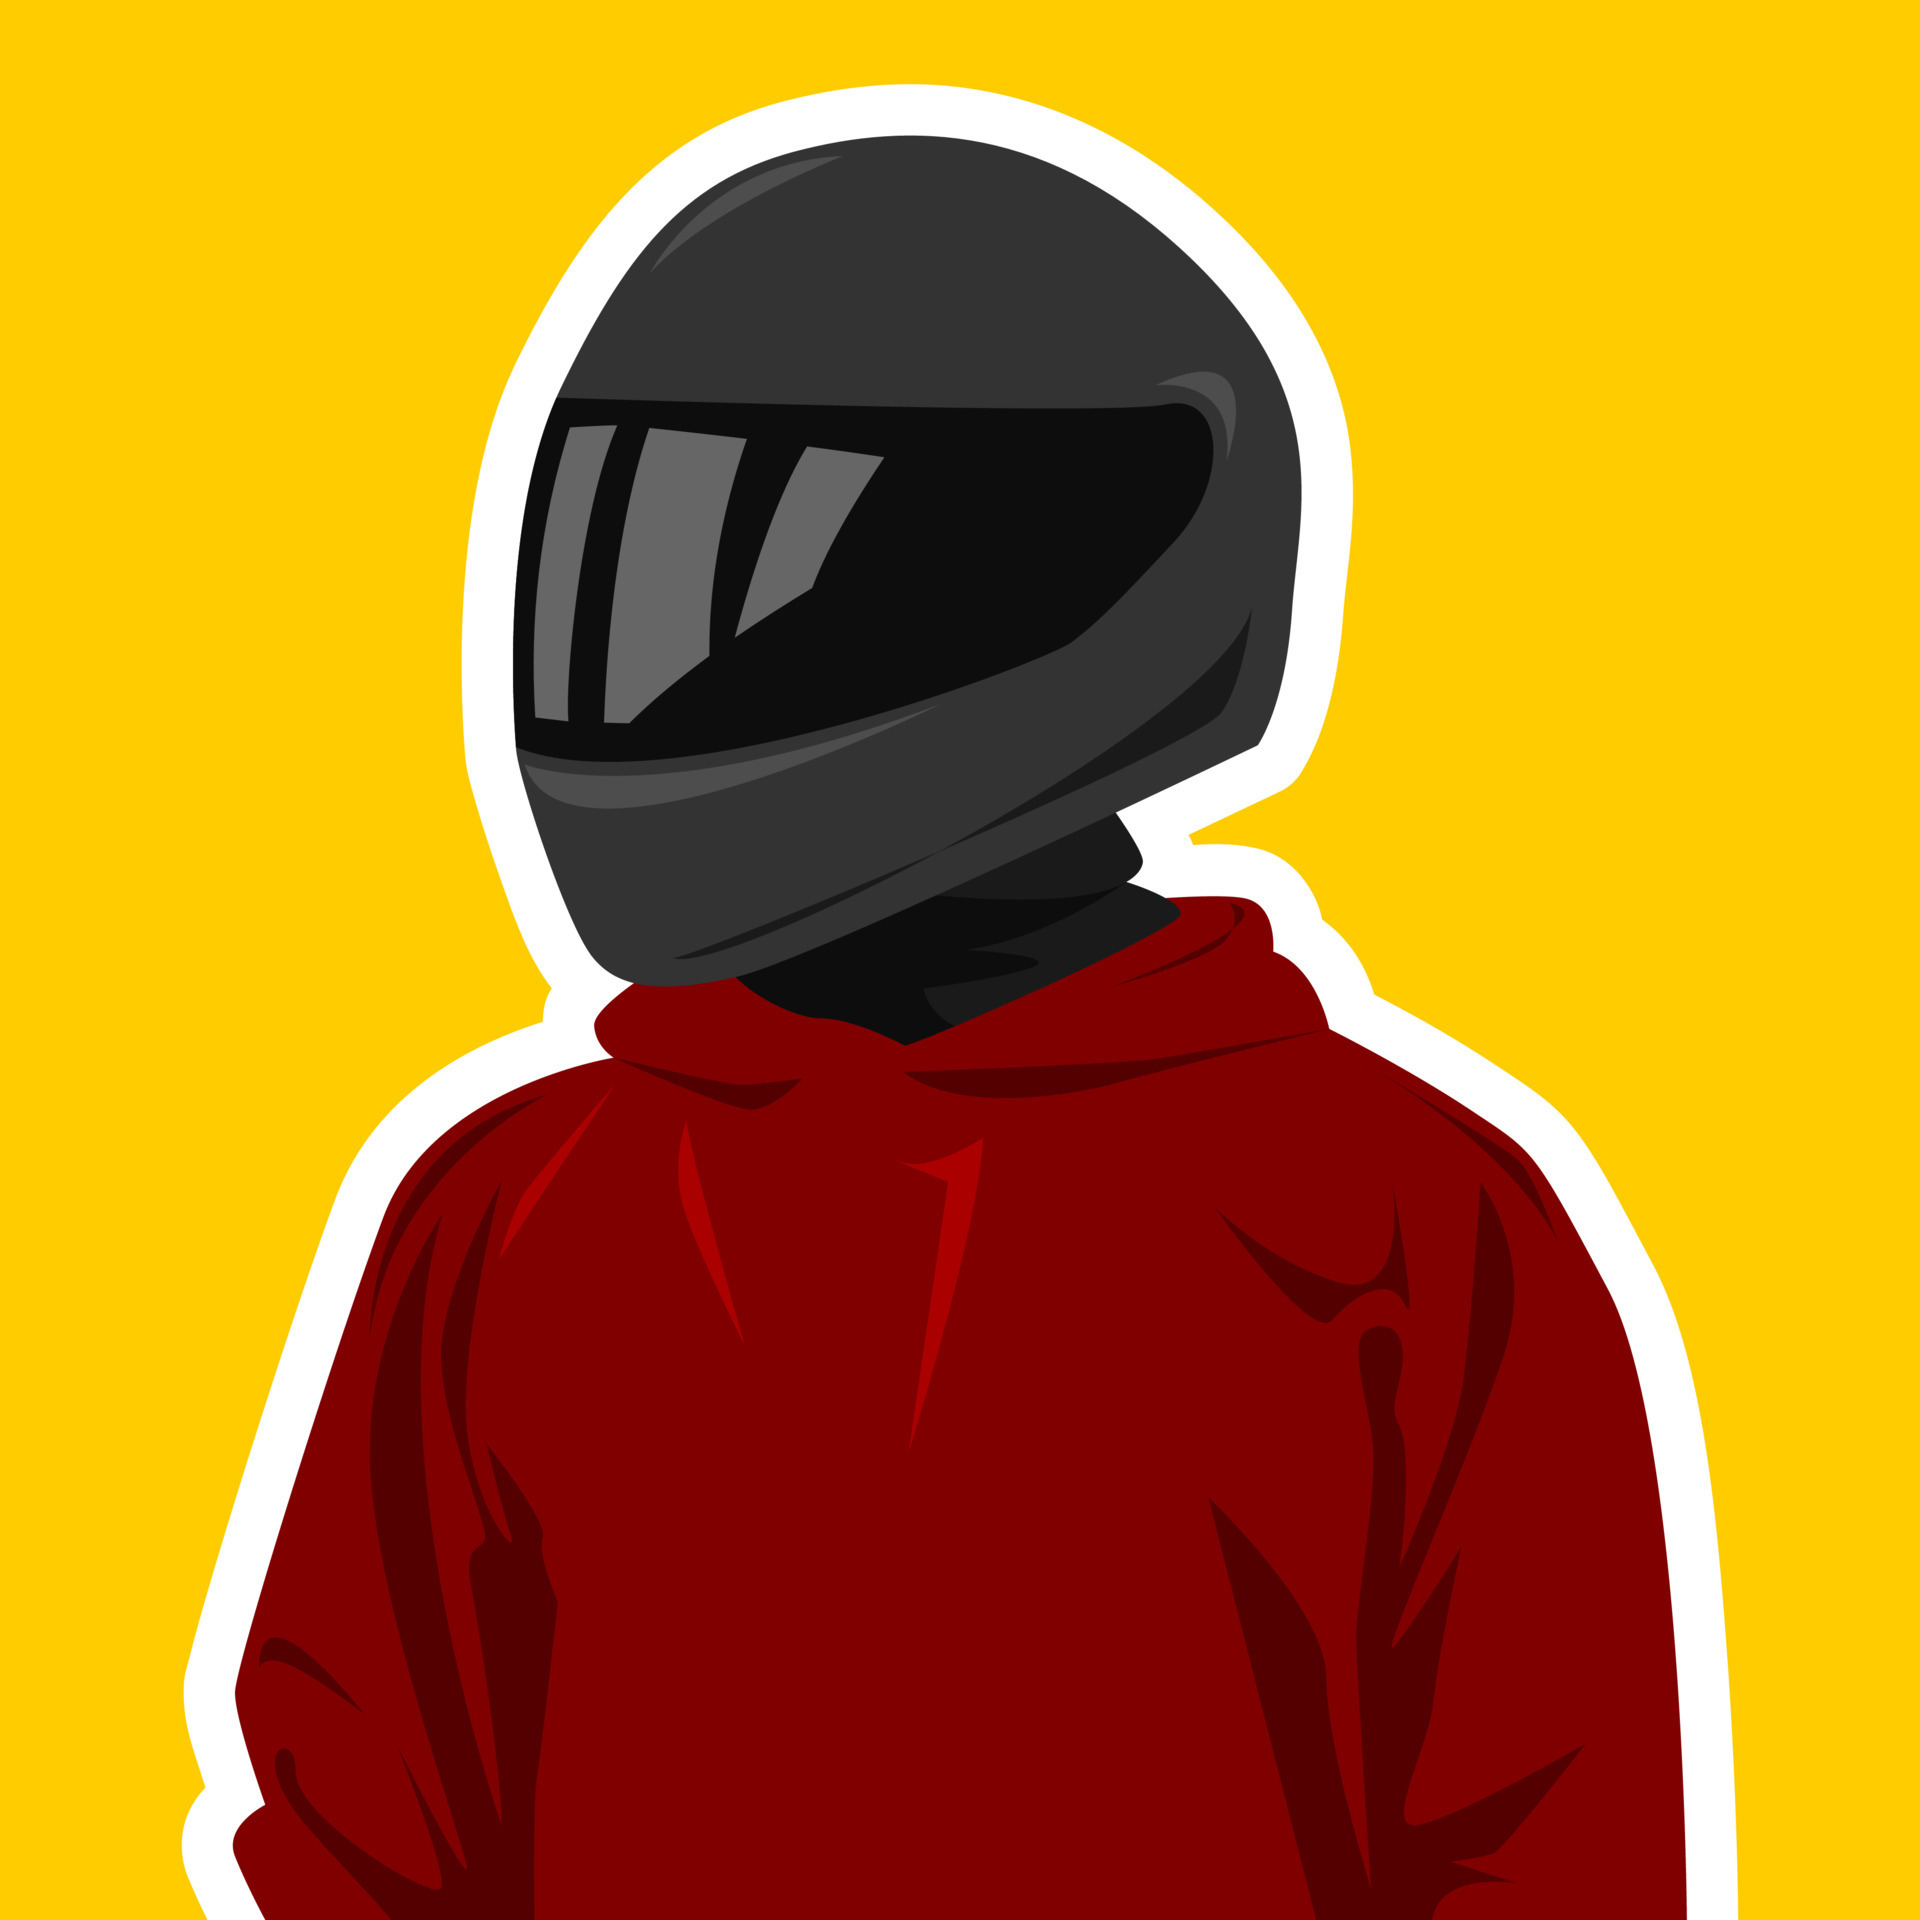 Rough Motorcyclist Avatar Character Stock Illustration  Download Image Now   Adult Adults Only Alternative Lifestyle  iStock